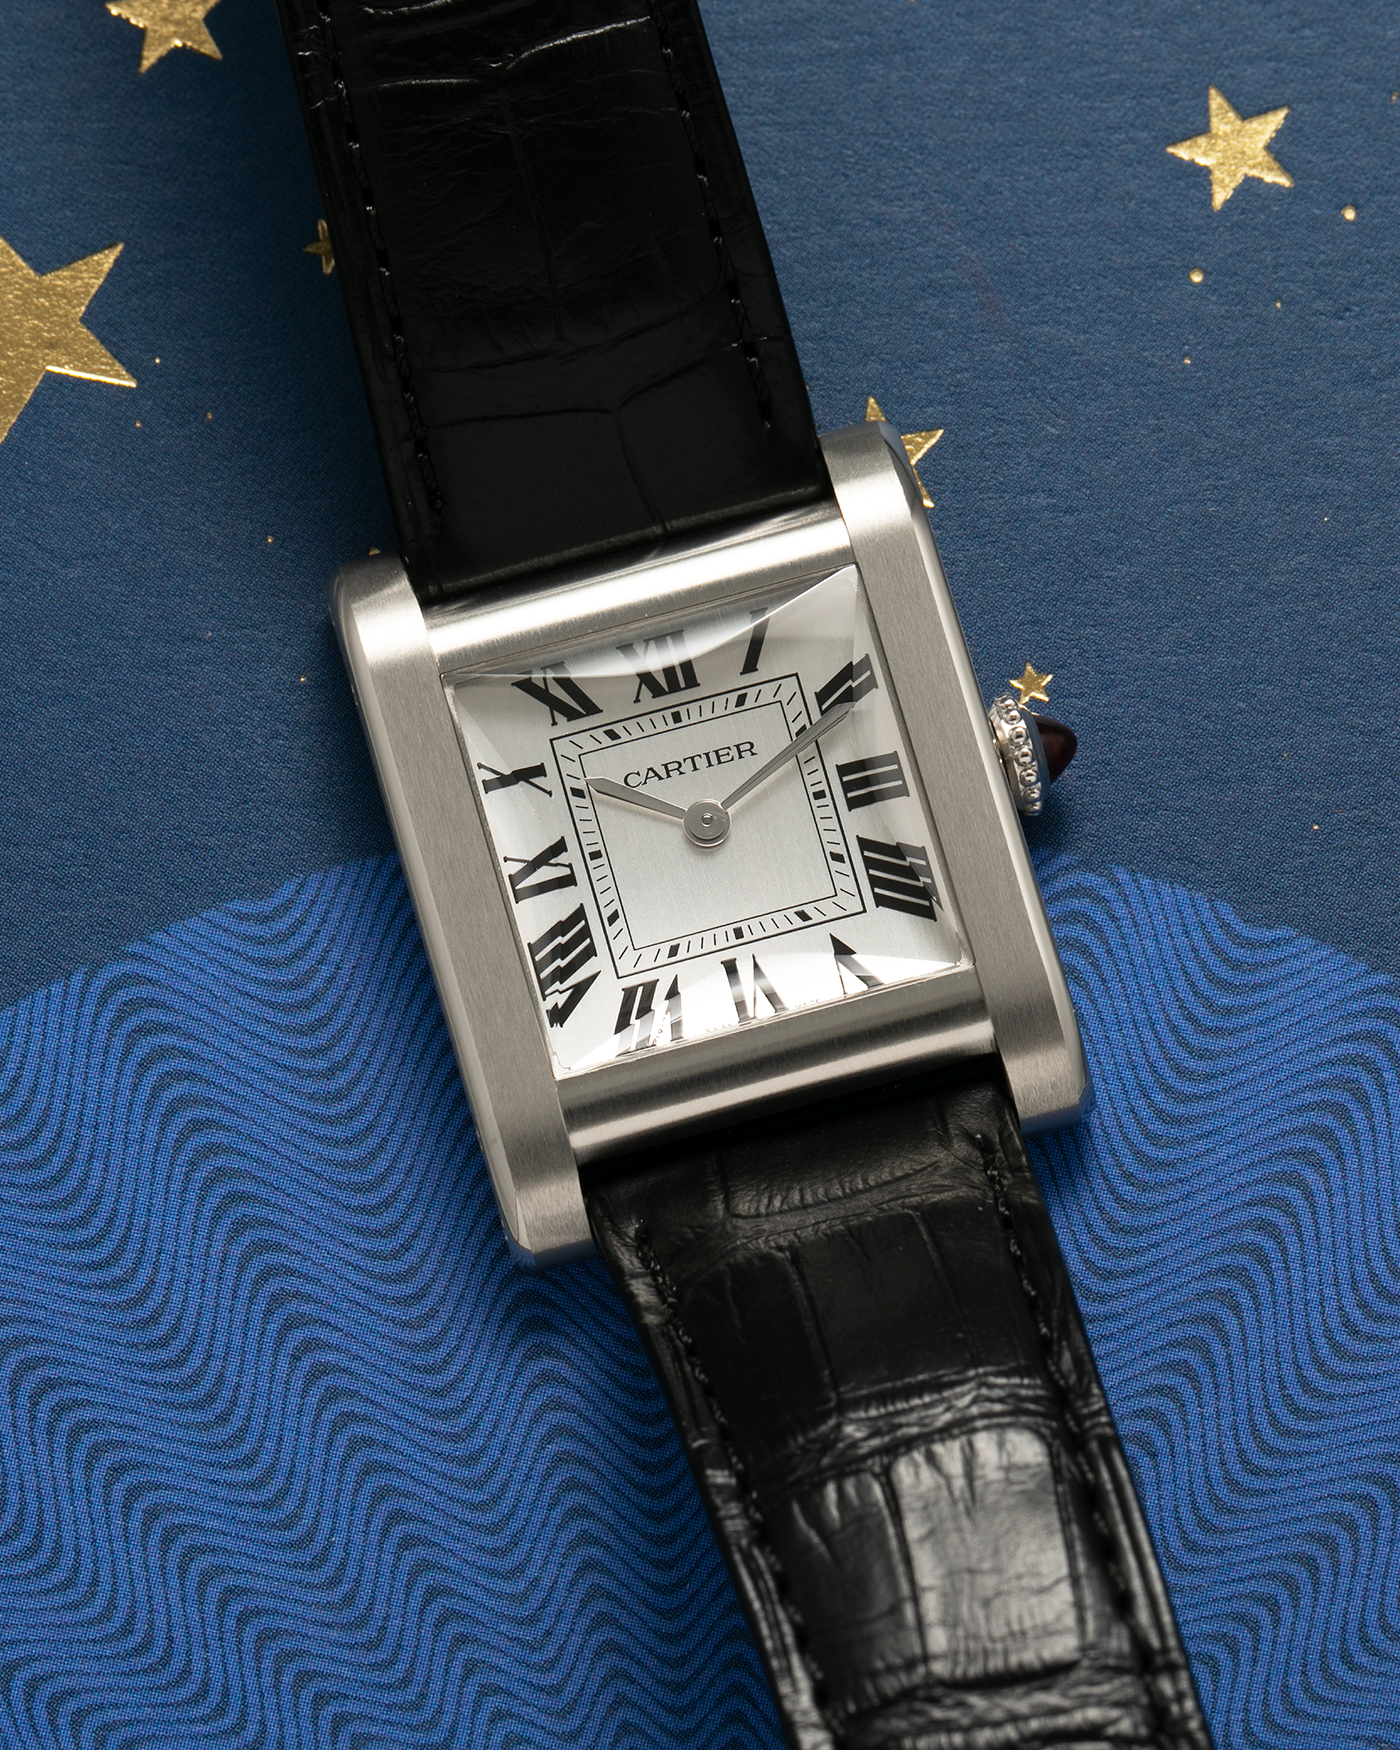 Brand: Cartier Year: 2023 Model: Privé Tank Normale, Limited to 200 Pieces in this Combination Reference Number: CRWGTA0109 Material: Platinum 950 Movement: Cartier Cal. 070 MC, Manual-Winding Case Dimensions: 32.6mm x 25.7mm Lug Width: 19mm Strap: Cartier Black Alligator Leather Strap with Signed Platinum 950 Tang Buckle